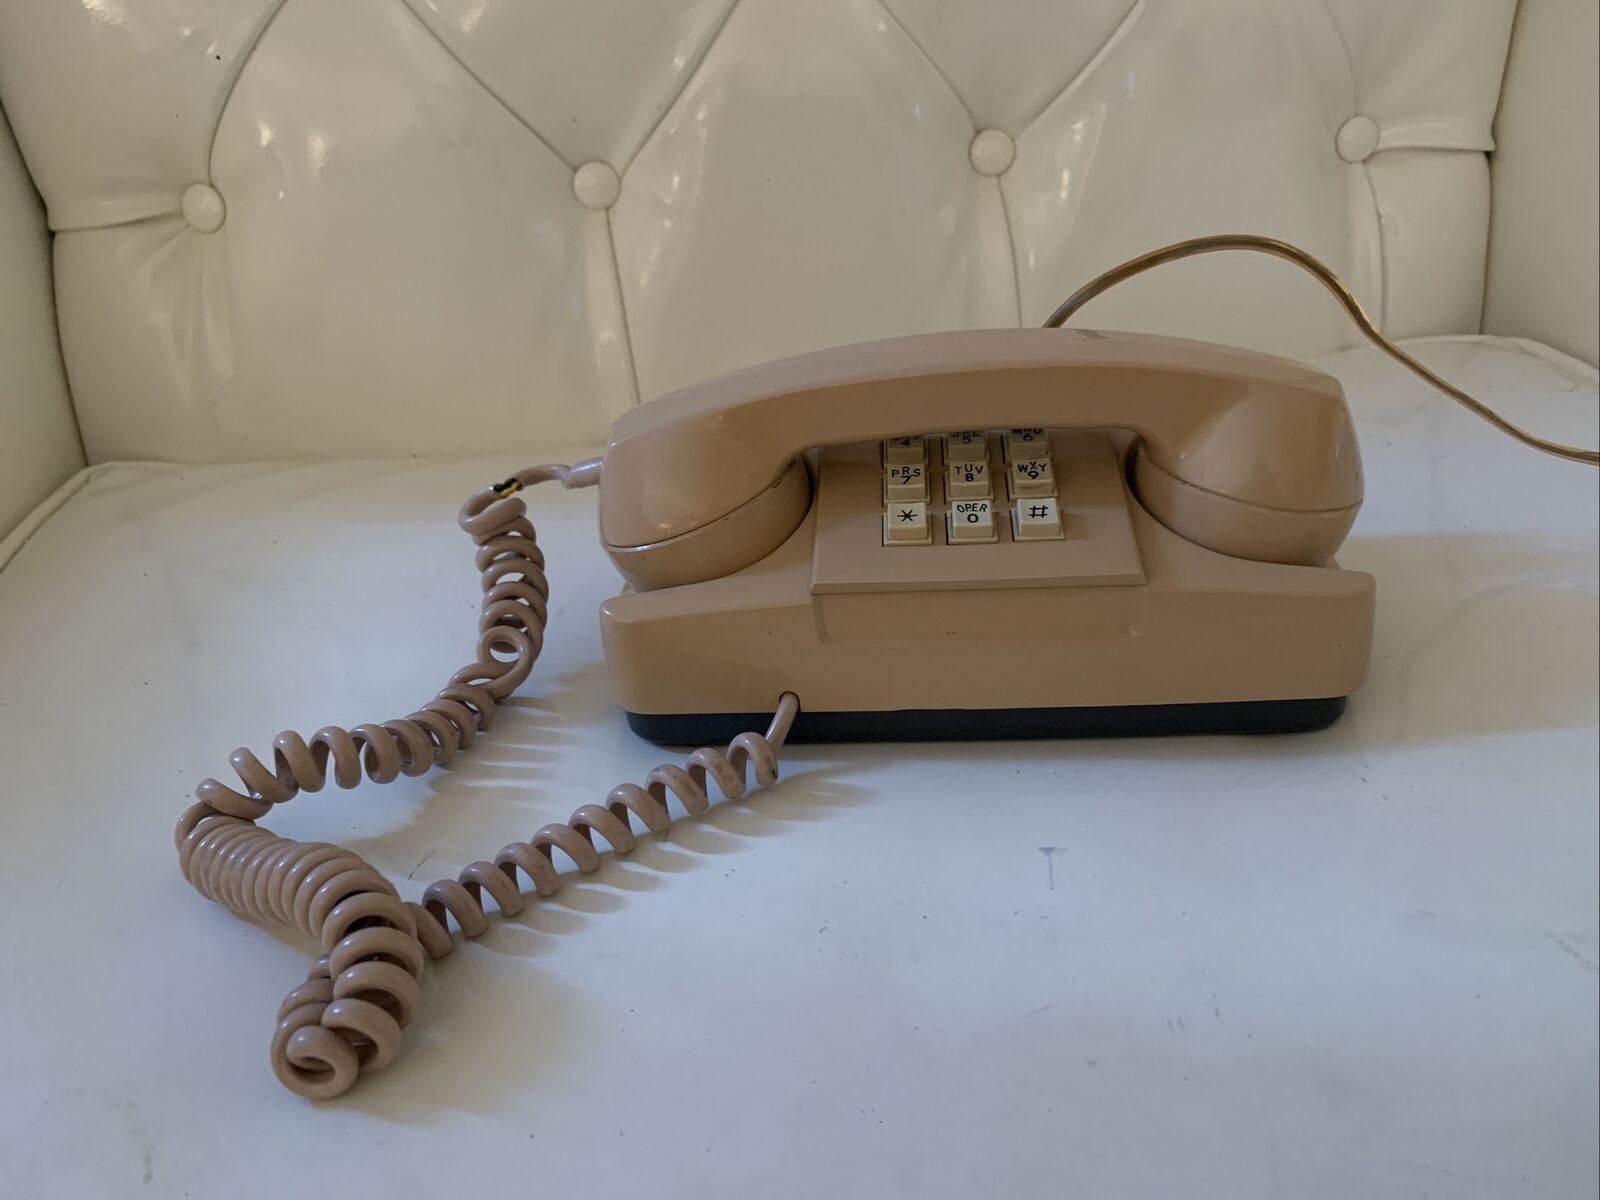 Vintage 1970s Starlight Automatic Electric Tan Push Button Telephone Phone